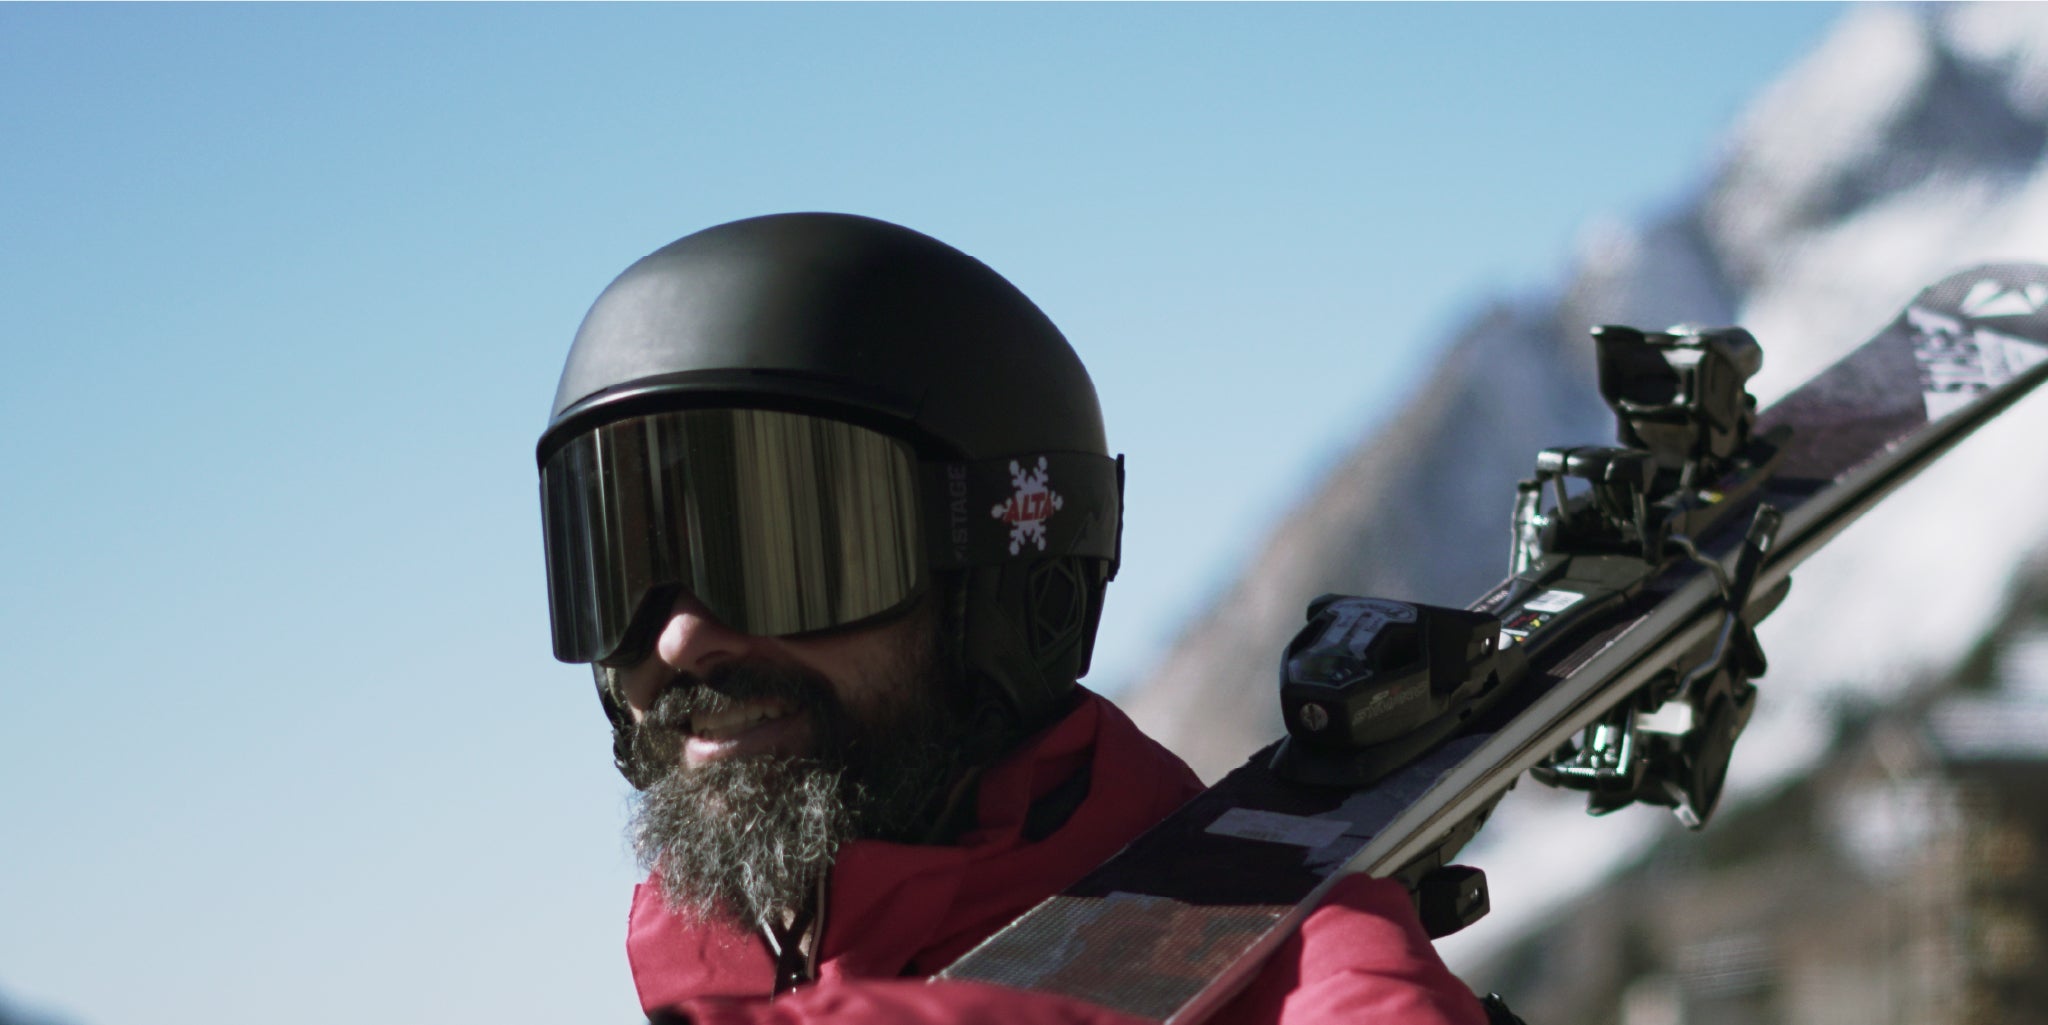 A man wearing custom STAGE Propnetic Ski Goggles with ALTA ski resorts logo. The man is also holding a pair of custom STAGE skis.